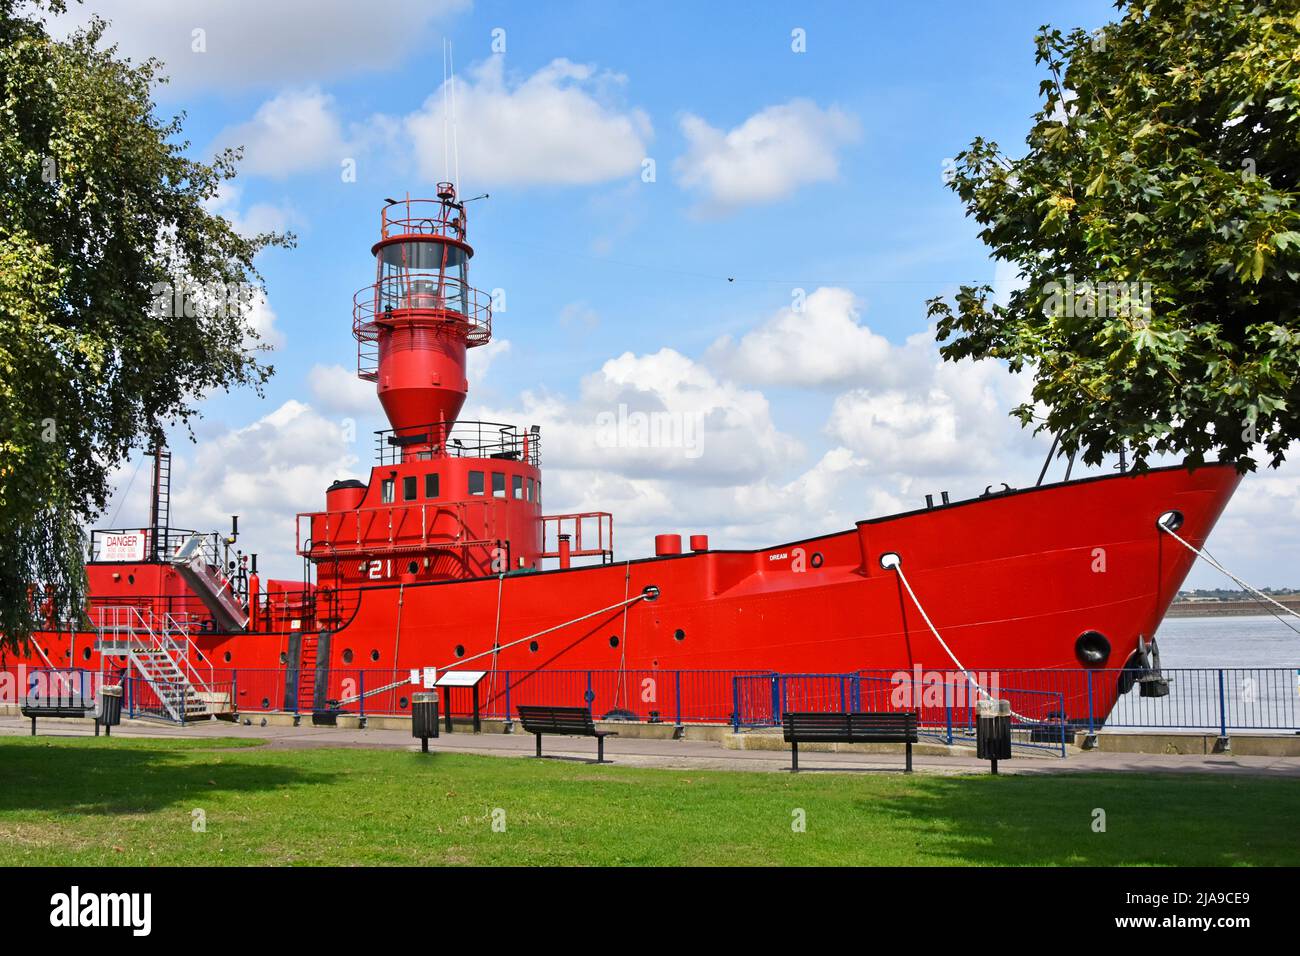 Historical Light Vessel LV21 a 40 metre steel hull red lightship adapted as floating art space moored on River Thames at Gravesend Kent England UK Stock Photo